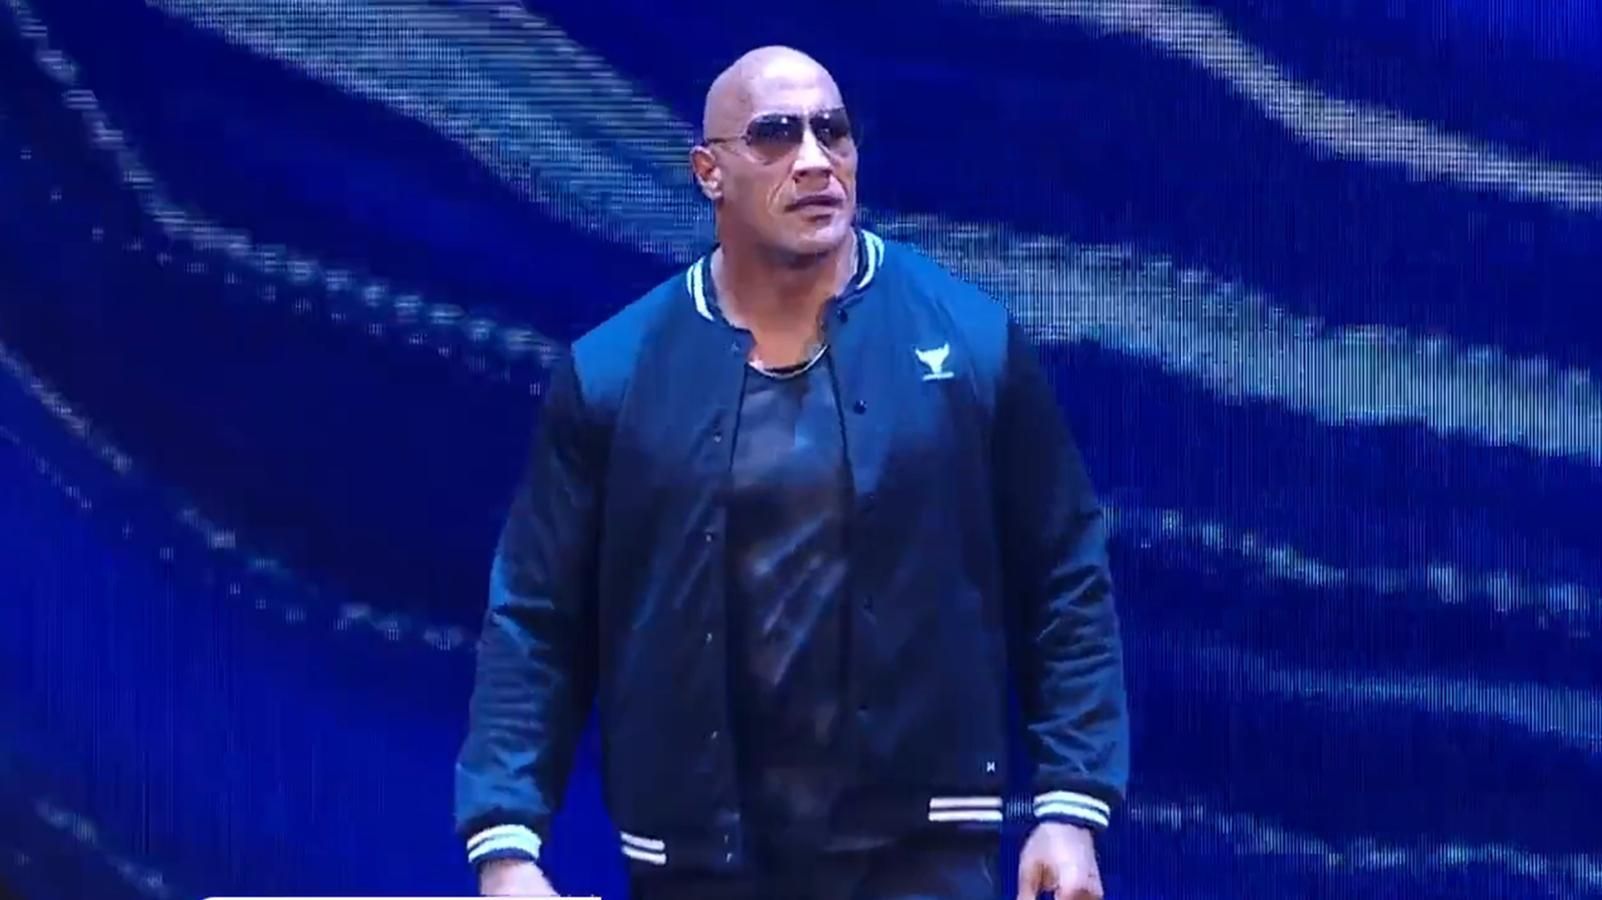 The Rock recently returned to WWE